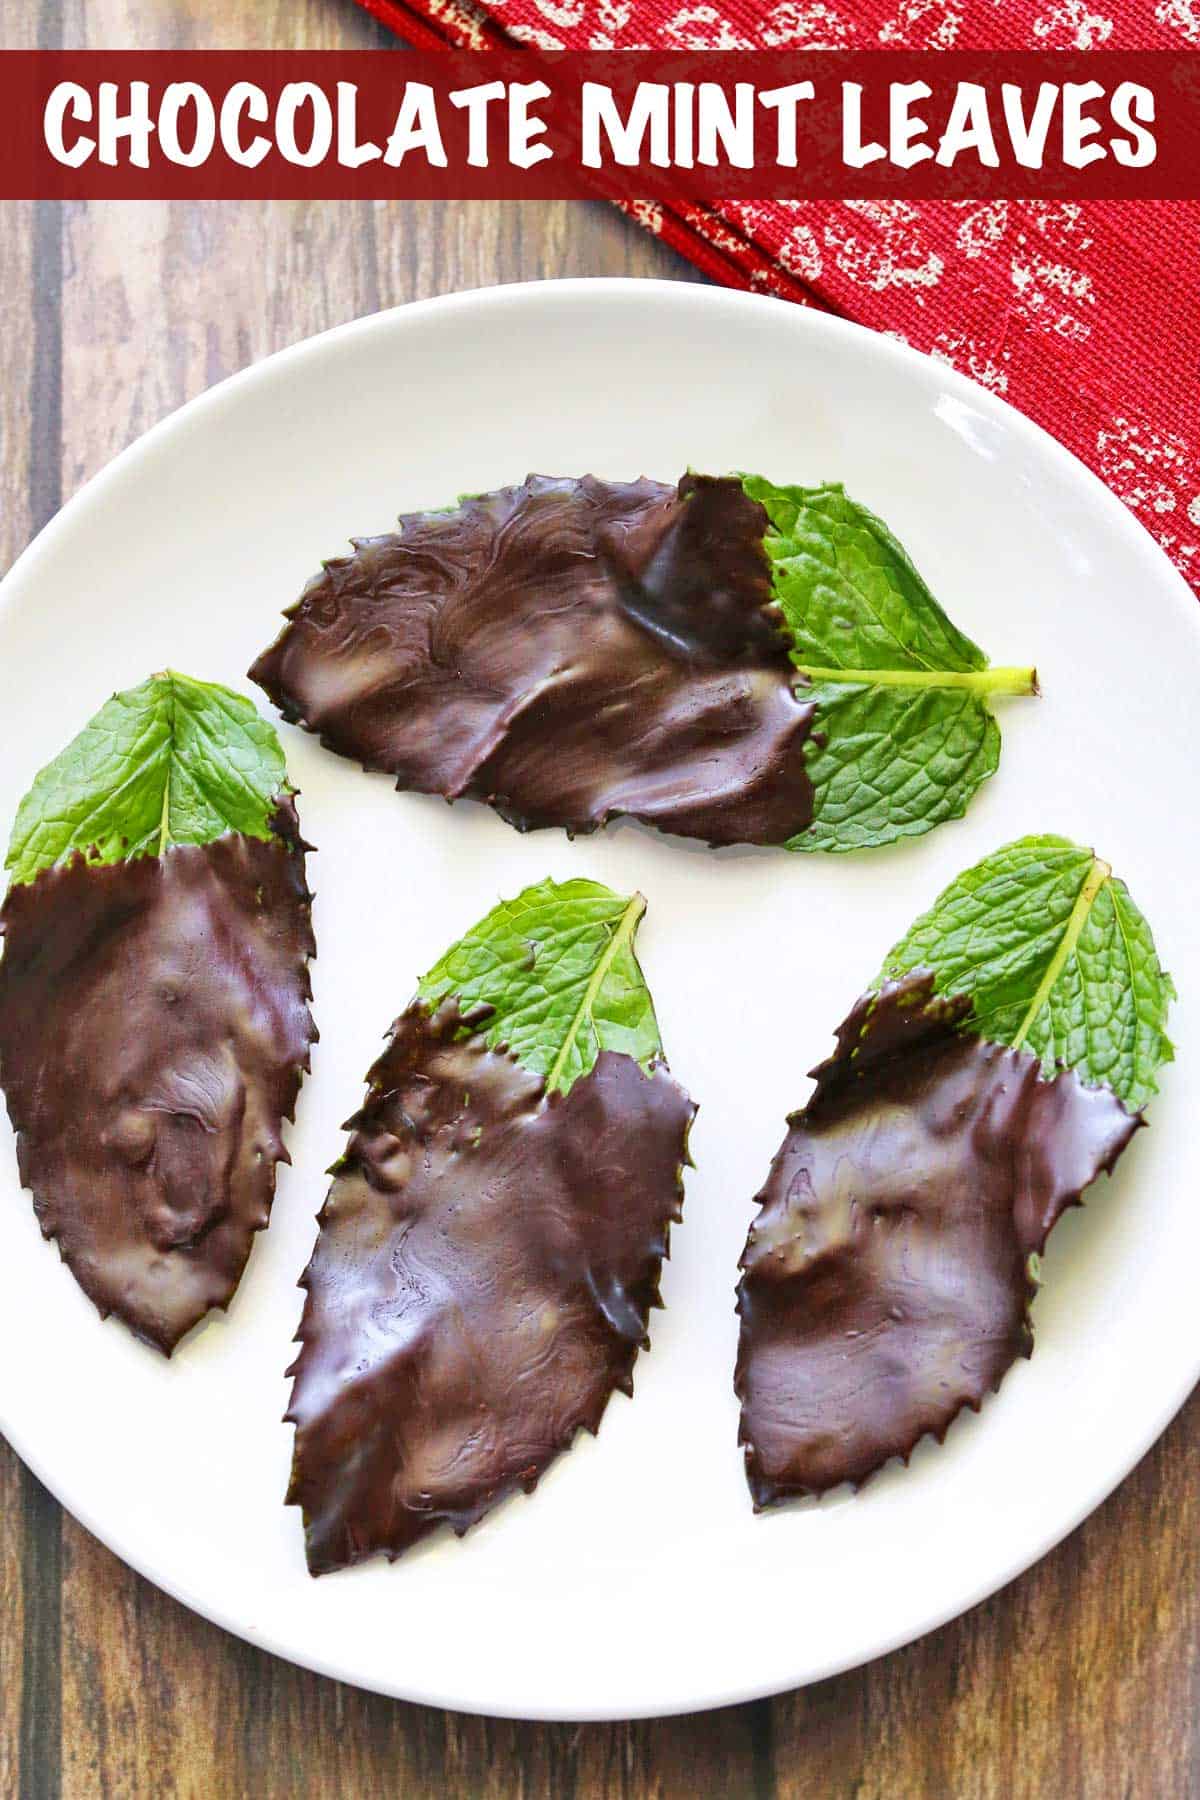 Chocolate-covered mint leaves served on a white plate with a red nakin.